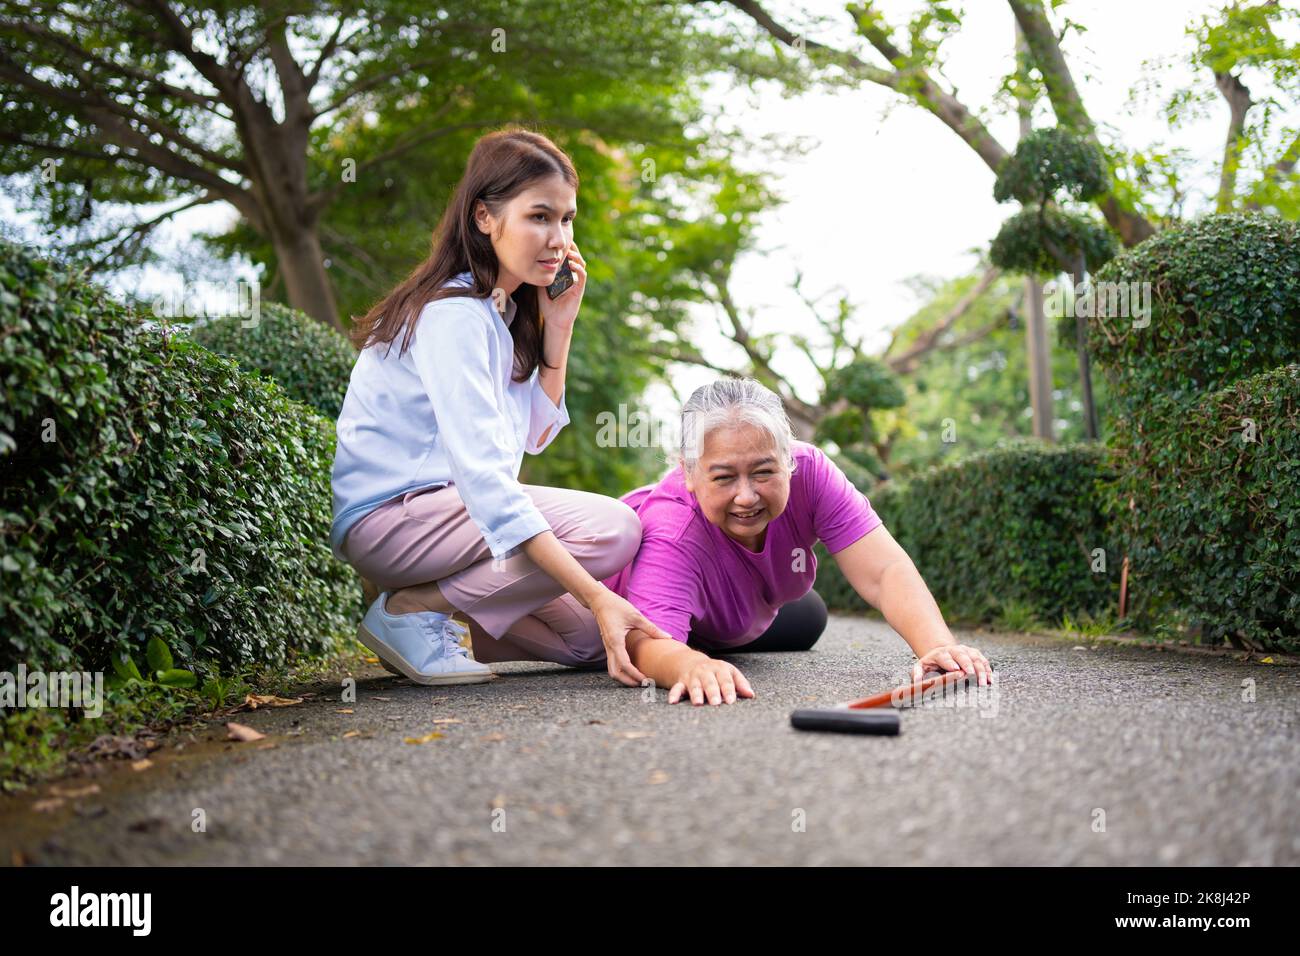 Asian senior woman fell down on lying floor because faint and limb weakness and pain from accident and woman came to help support and call emergency. Stock Photo